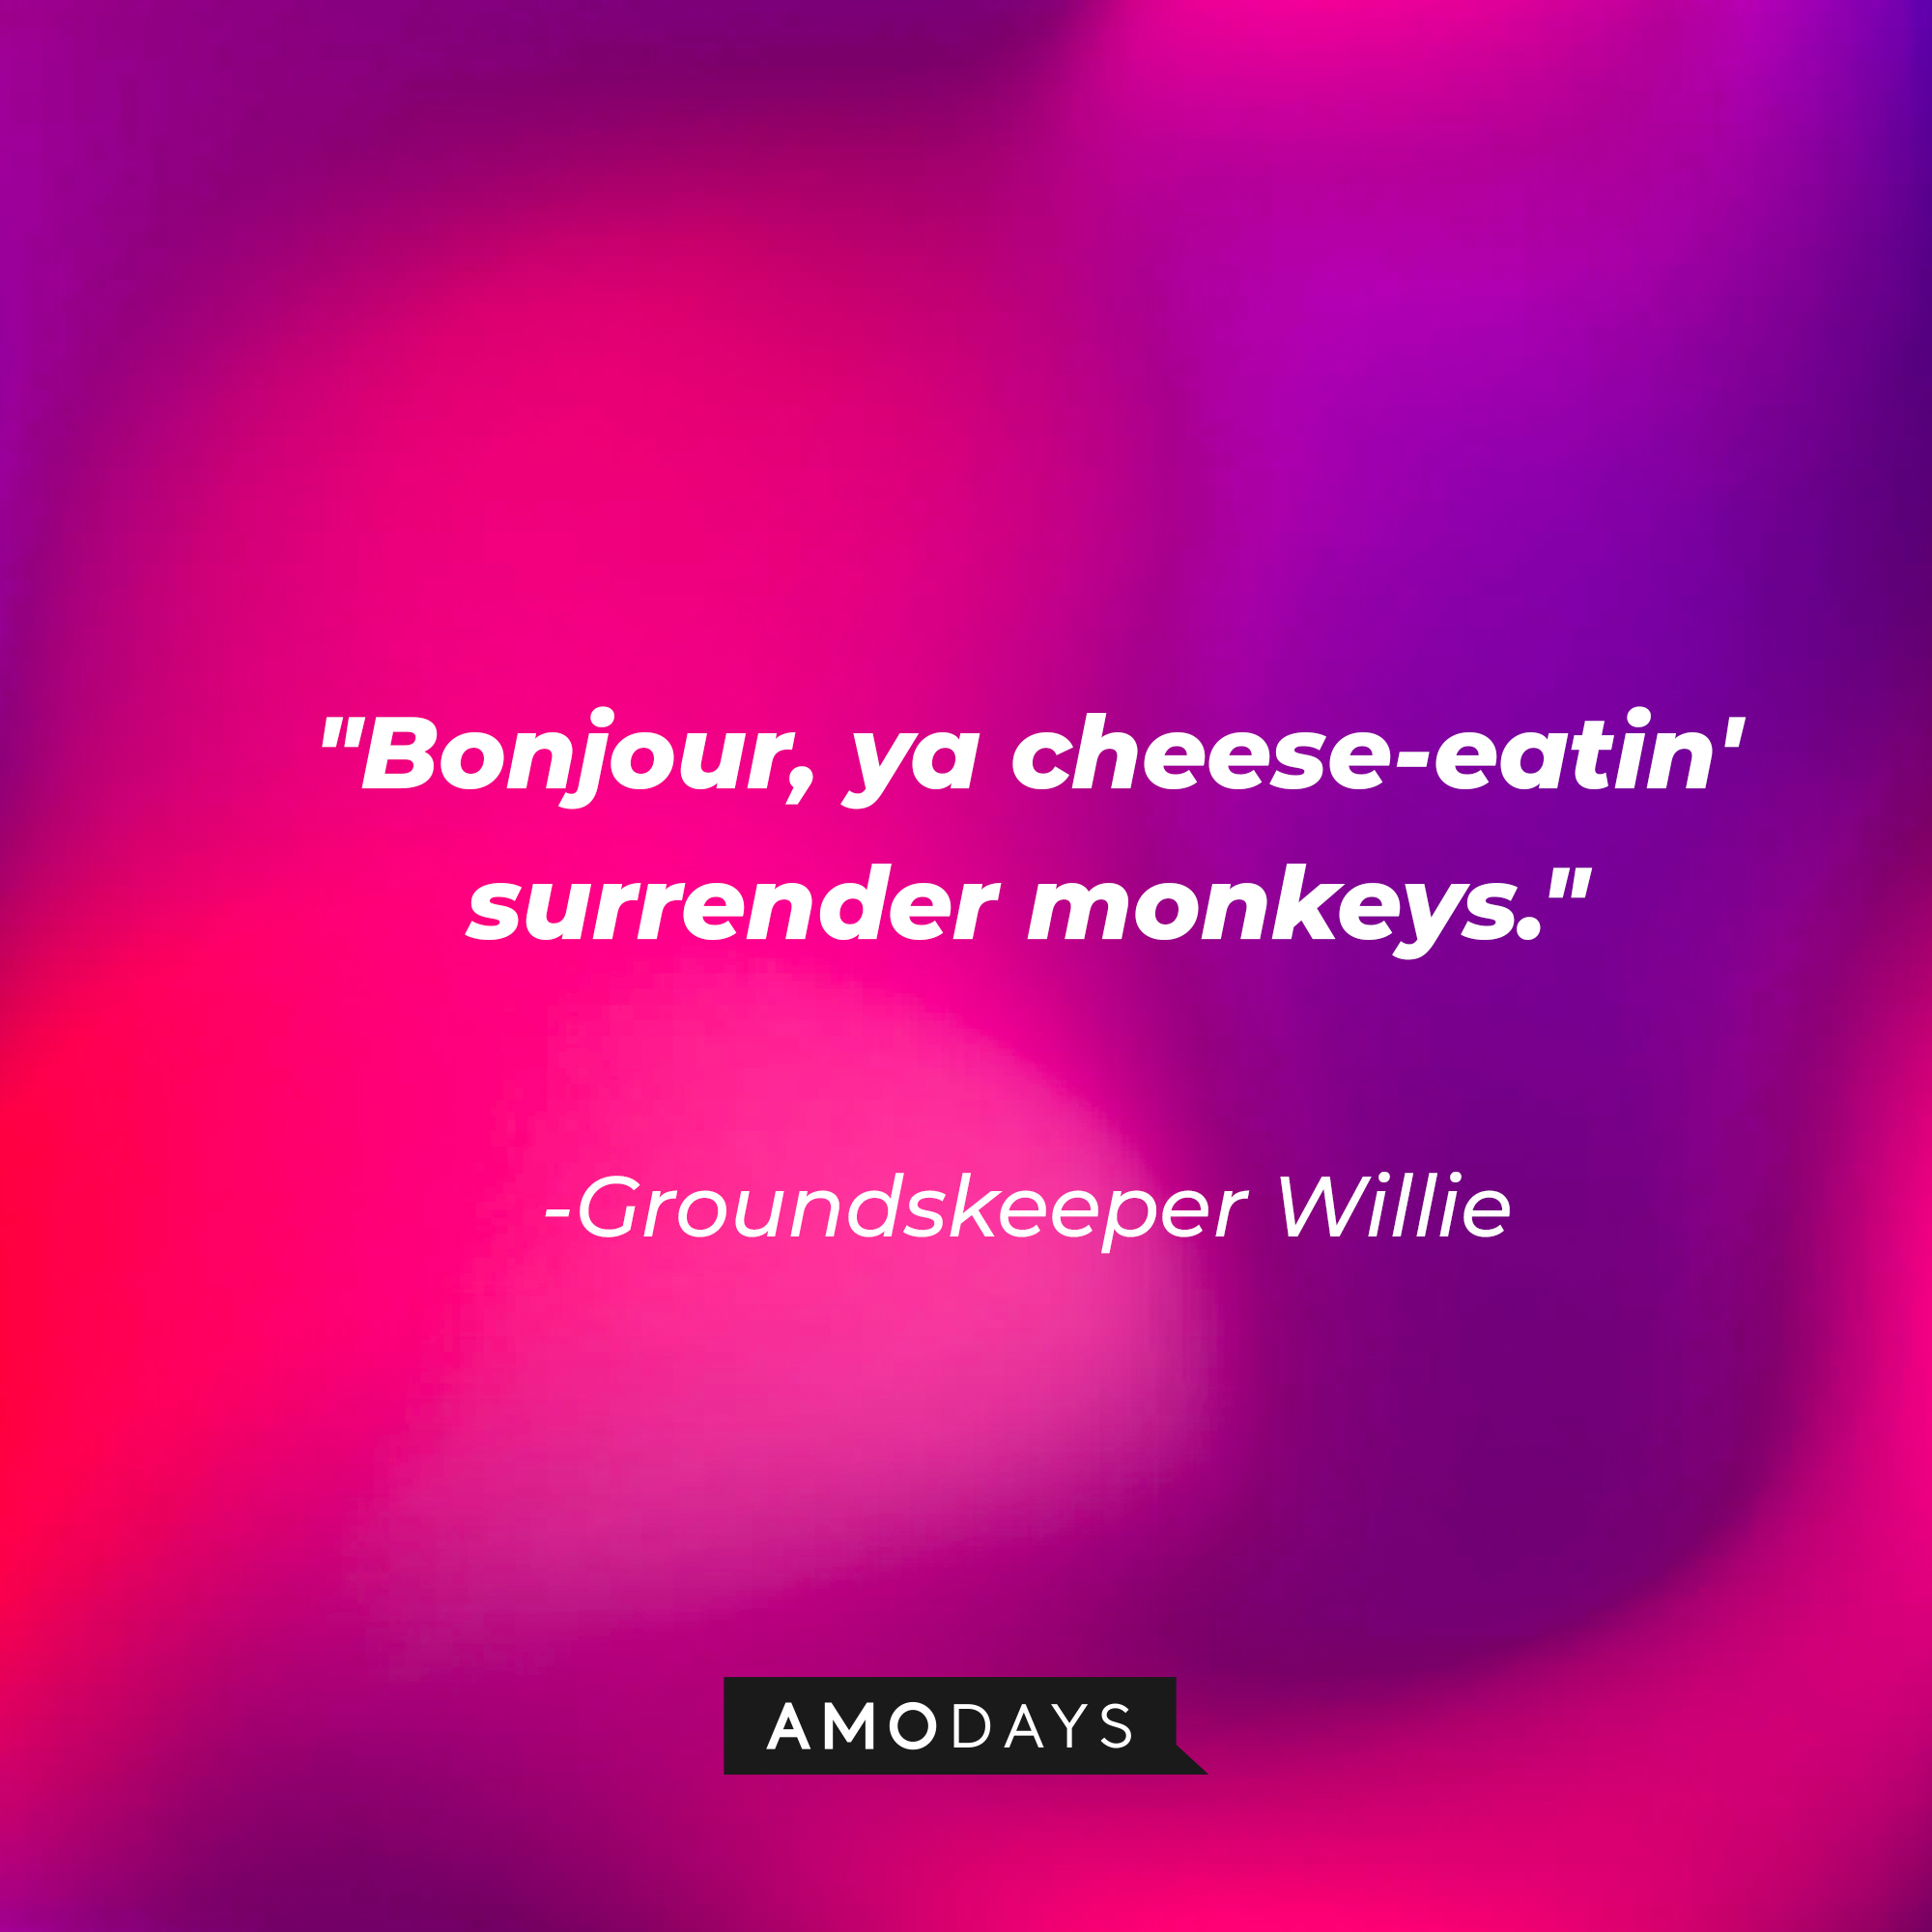 Groundskeeper Willie's quote: "Bonjour, ya cheese-eatin' surrender monkeys." | Source: AmoDays